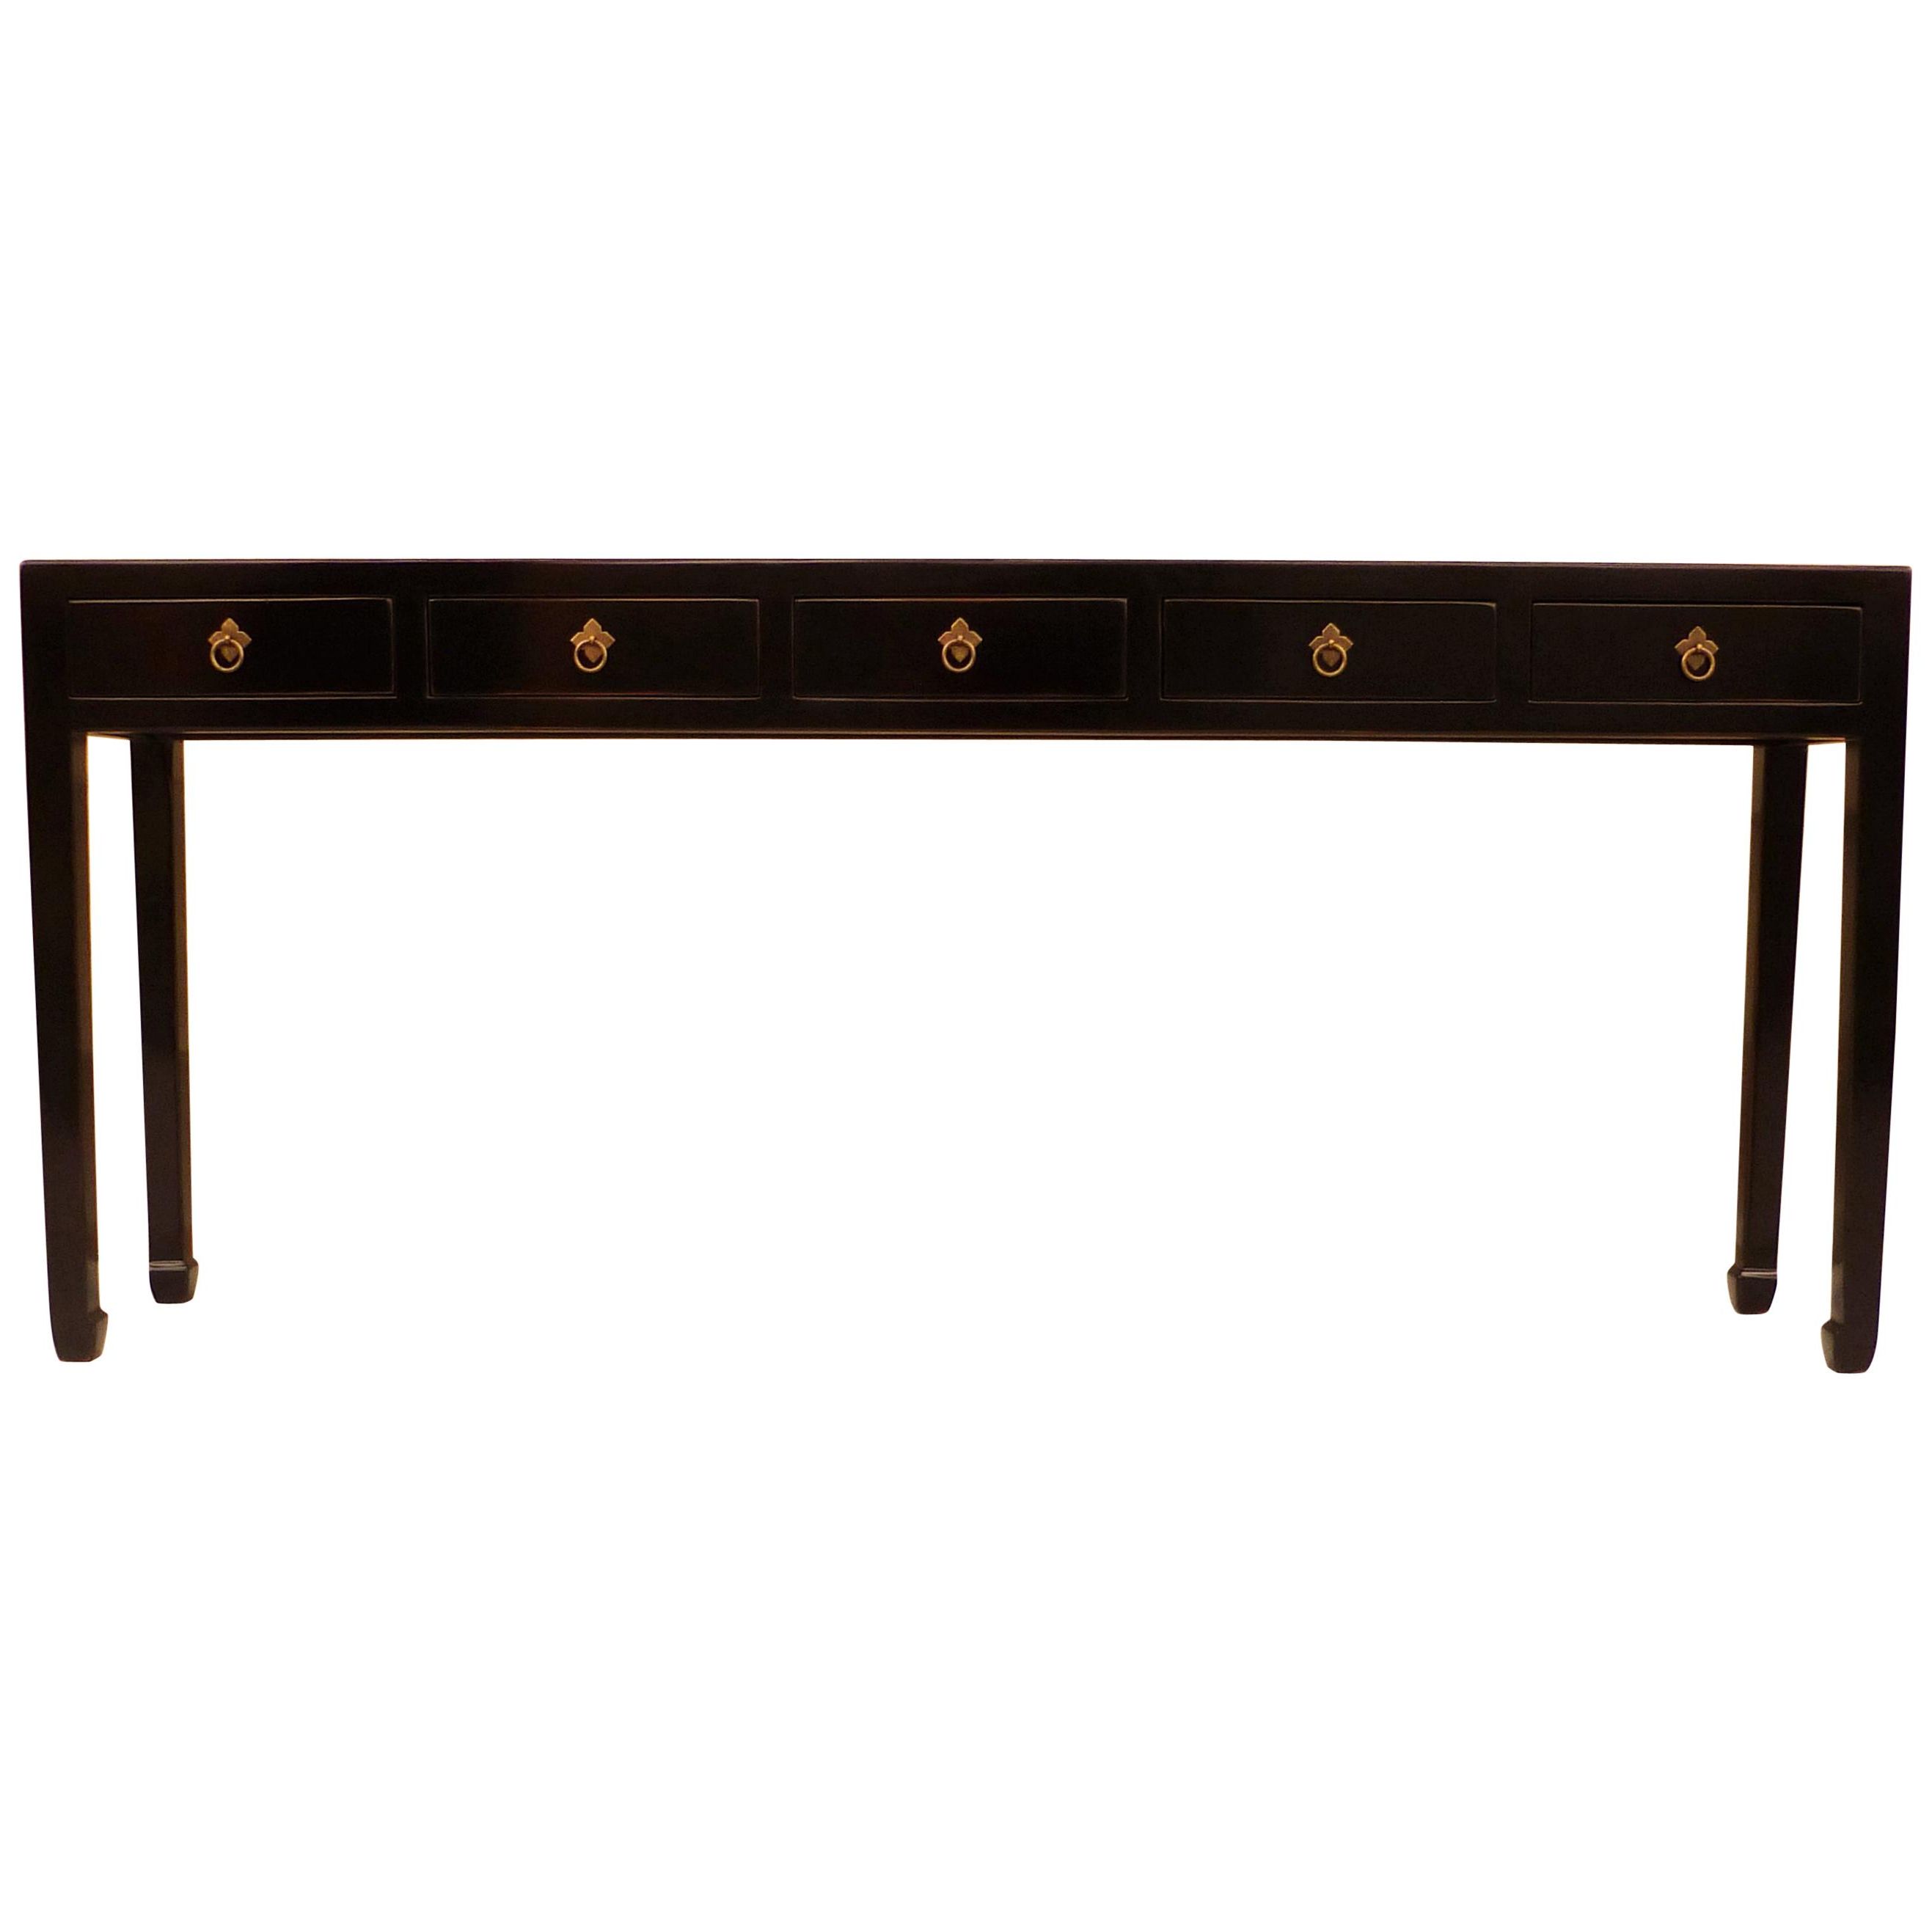 Antique And Vintage Console Tables – 7,877 For Sale At 1stdibs With Oscar 60 Inch Console Tables (View 12 of 20)